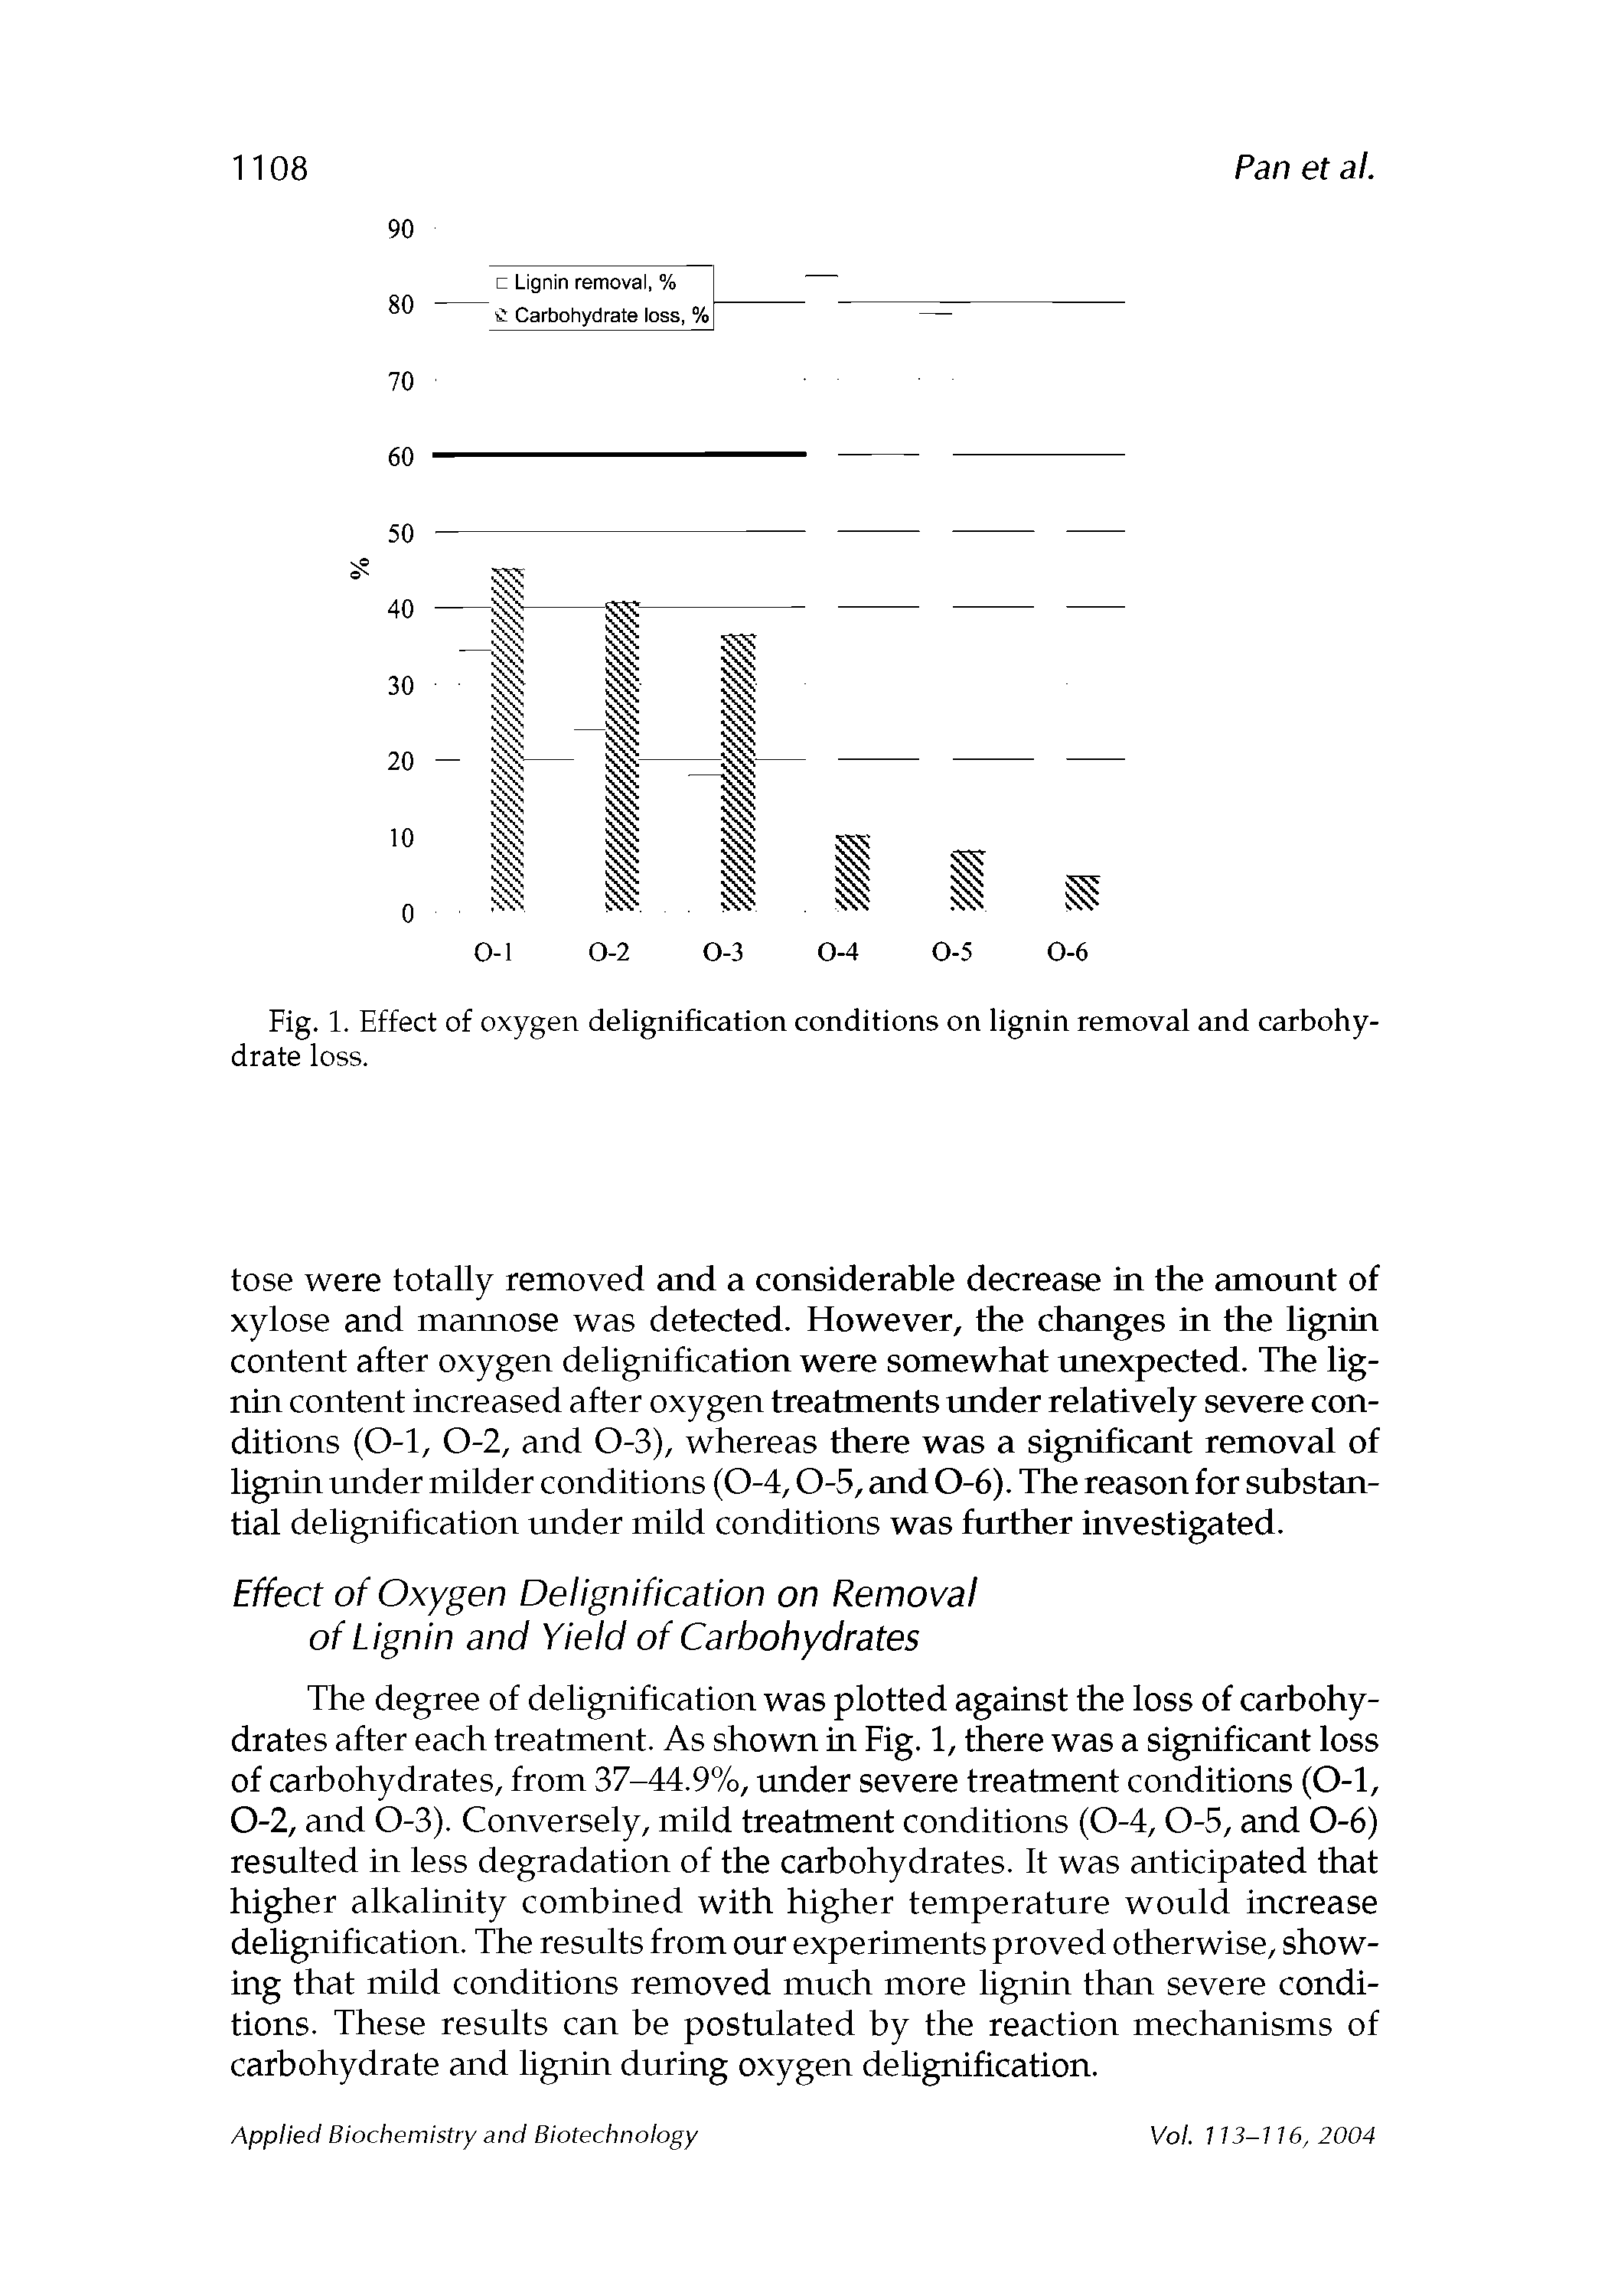 Fig. 1. Effect of oxygen delignification conditions on lignin removal and carbohydrate loss.